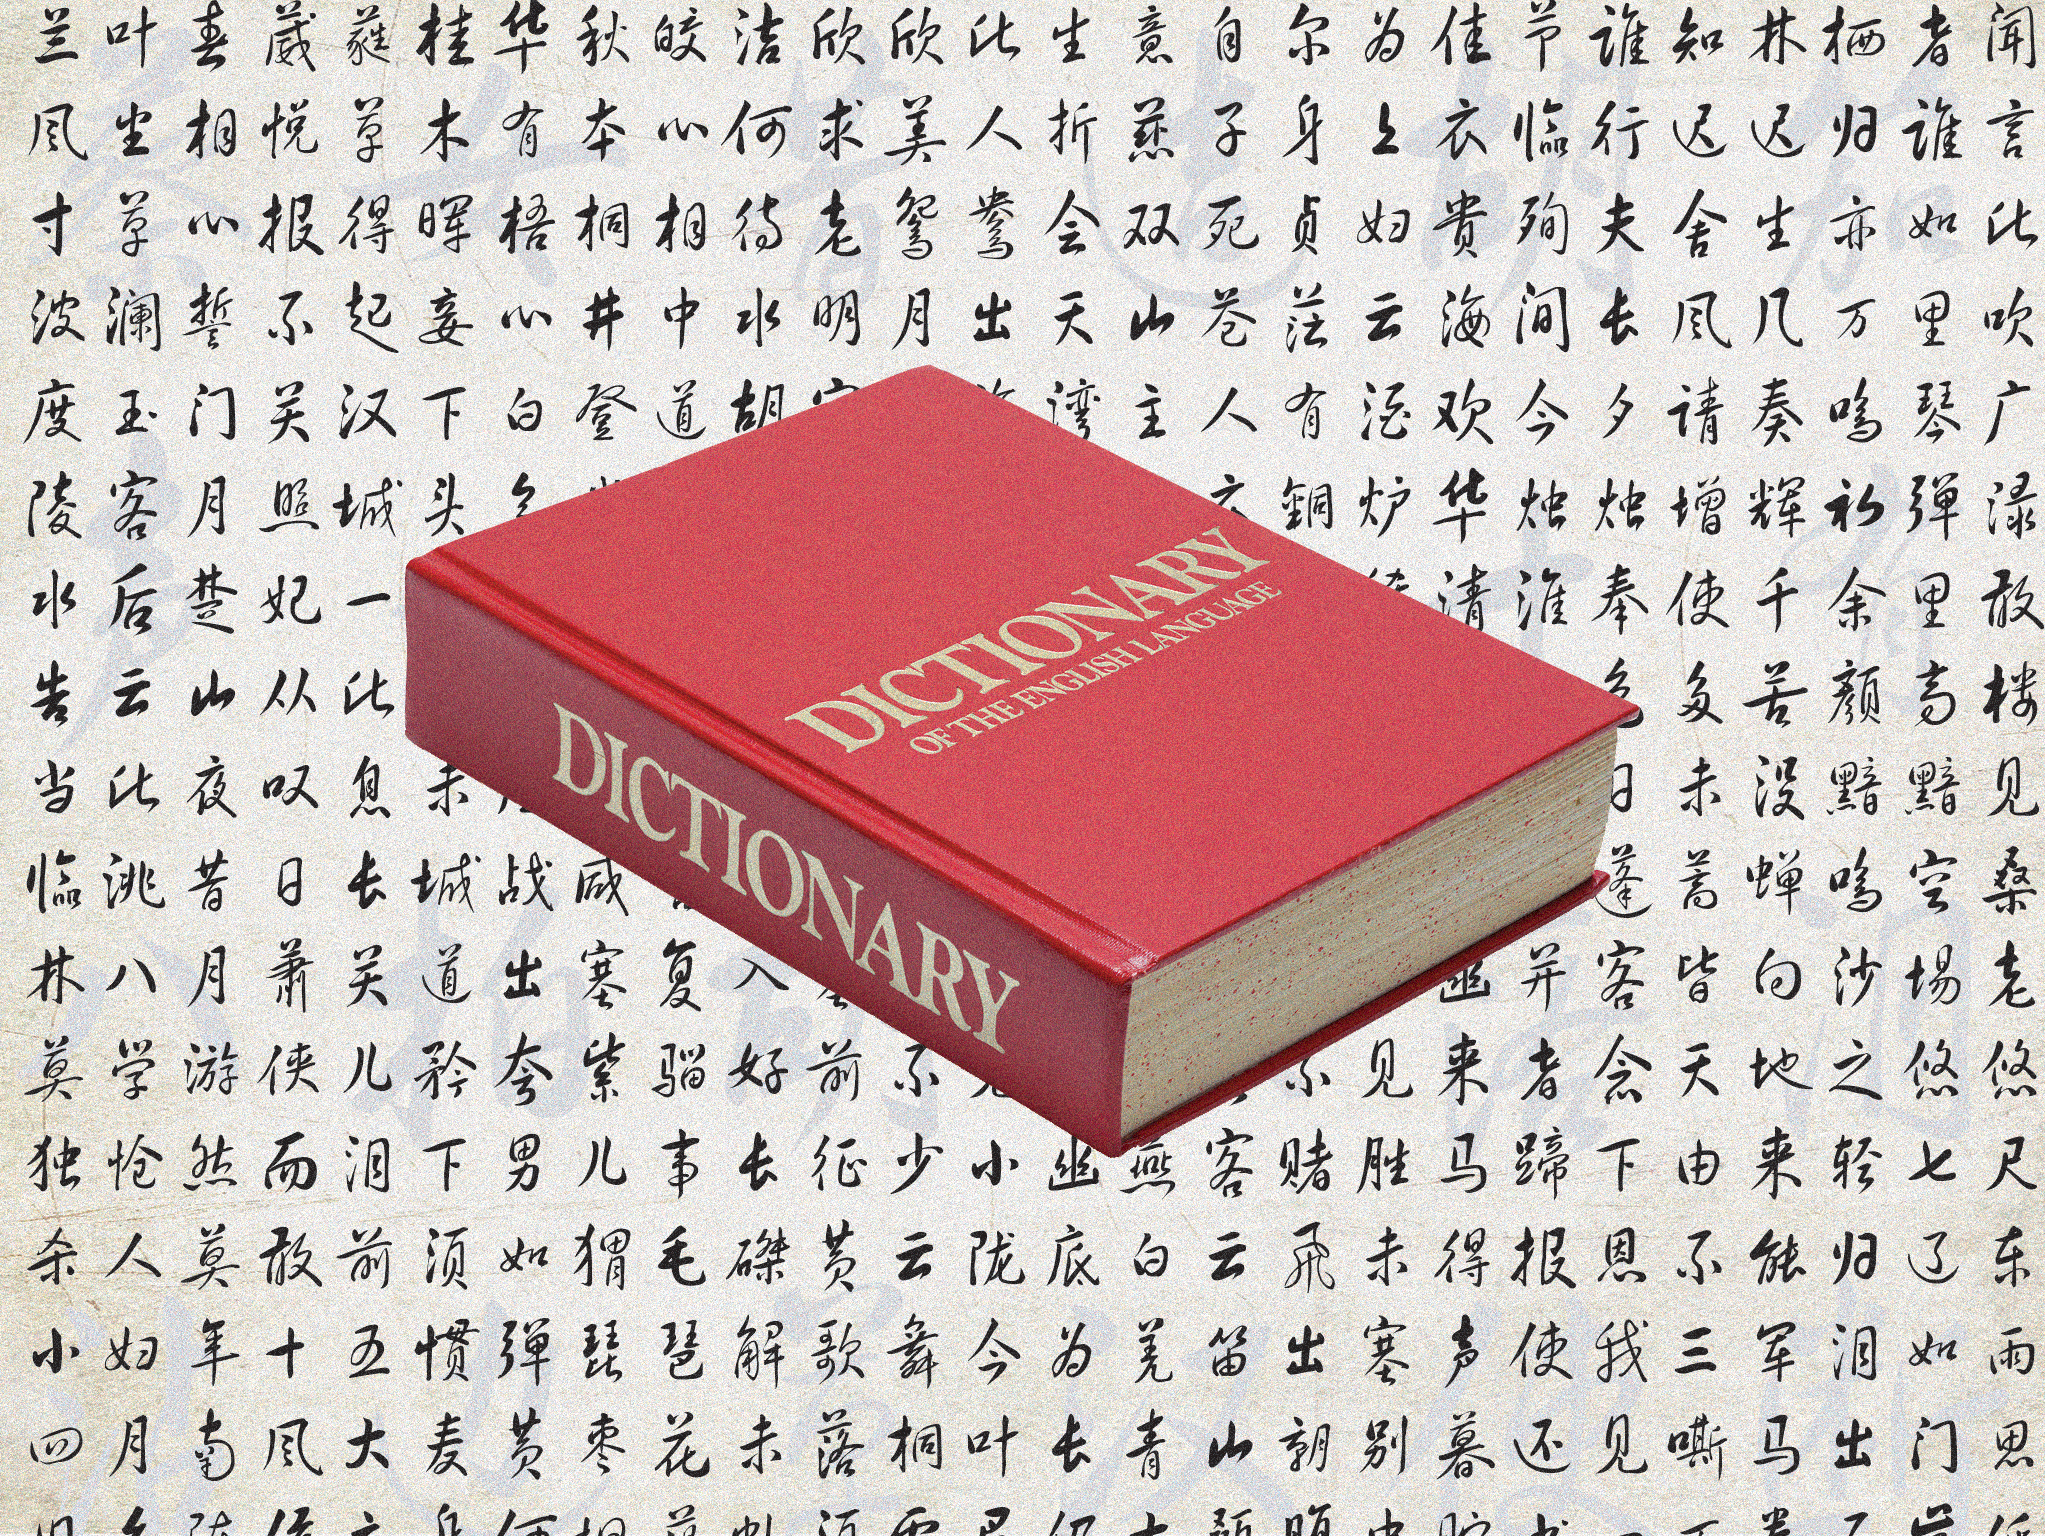 oxford dictionary adds japanese words